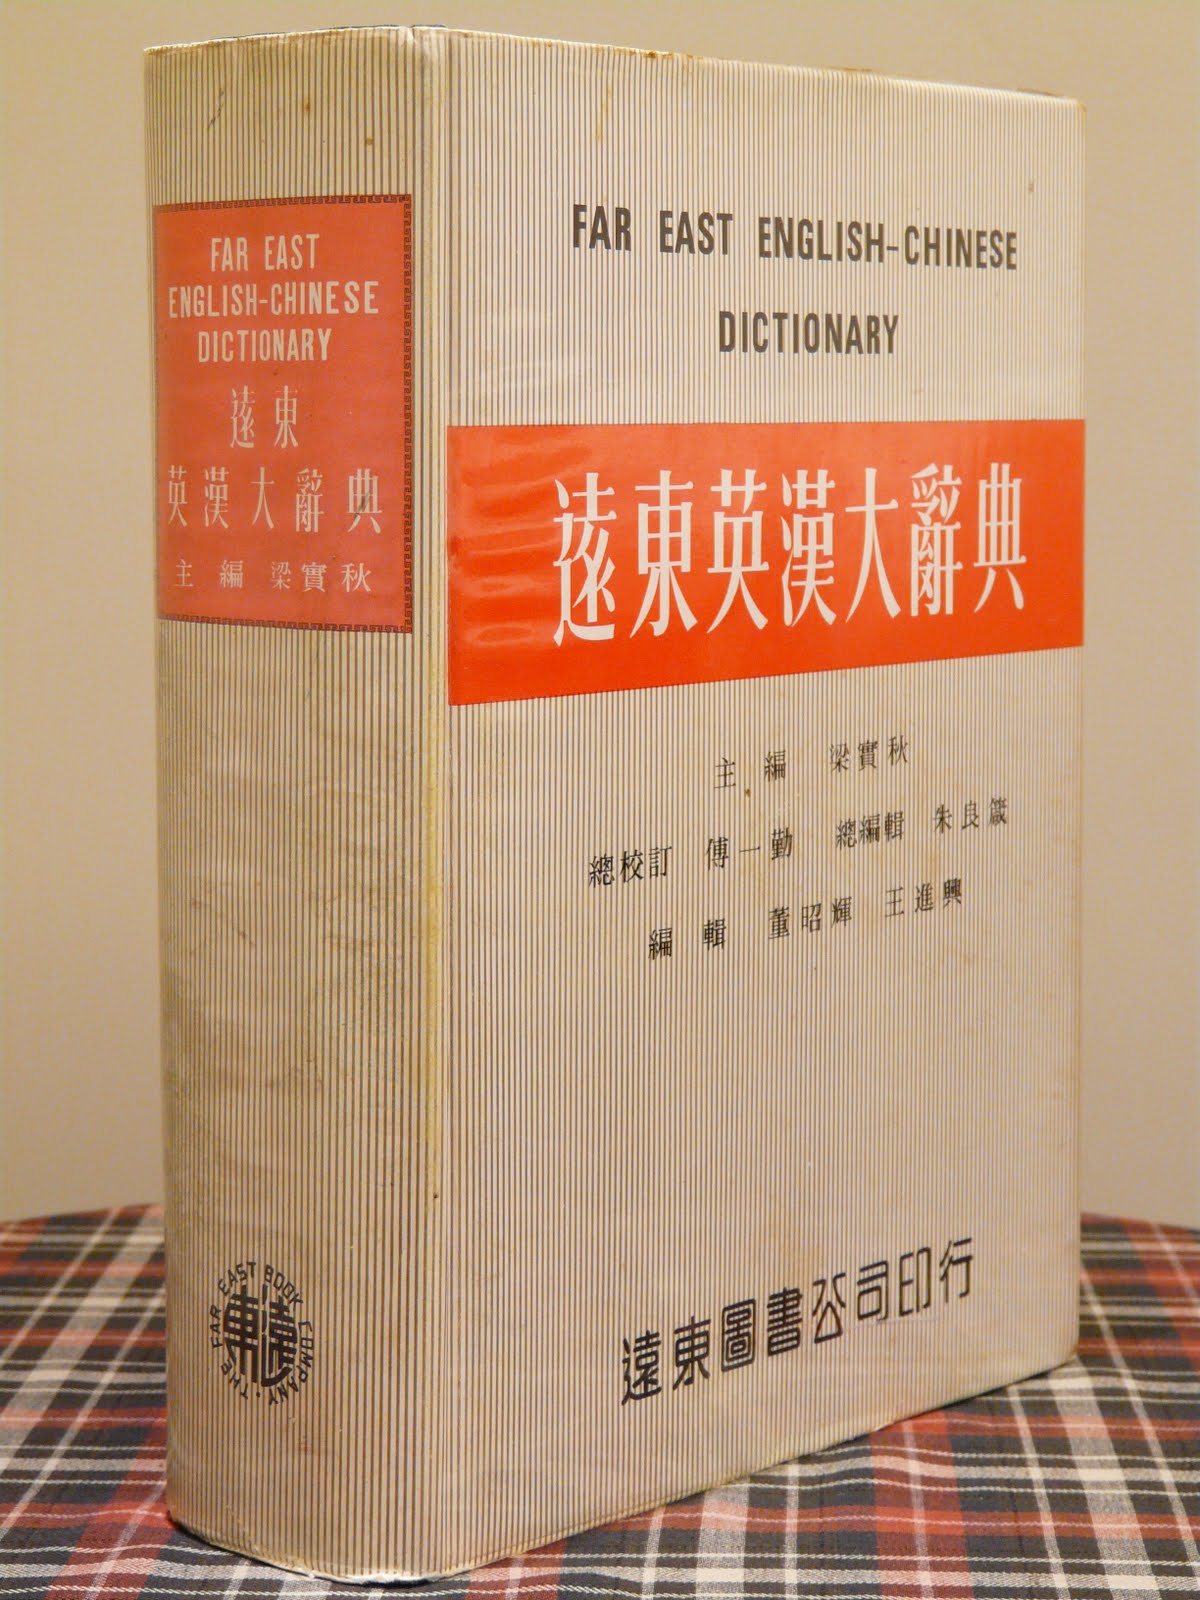 Far East English Chinese Dictionary 1985 b046c